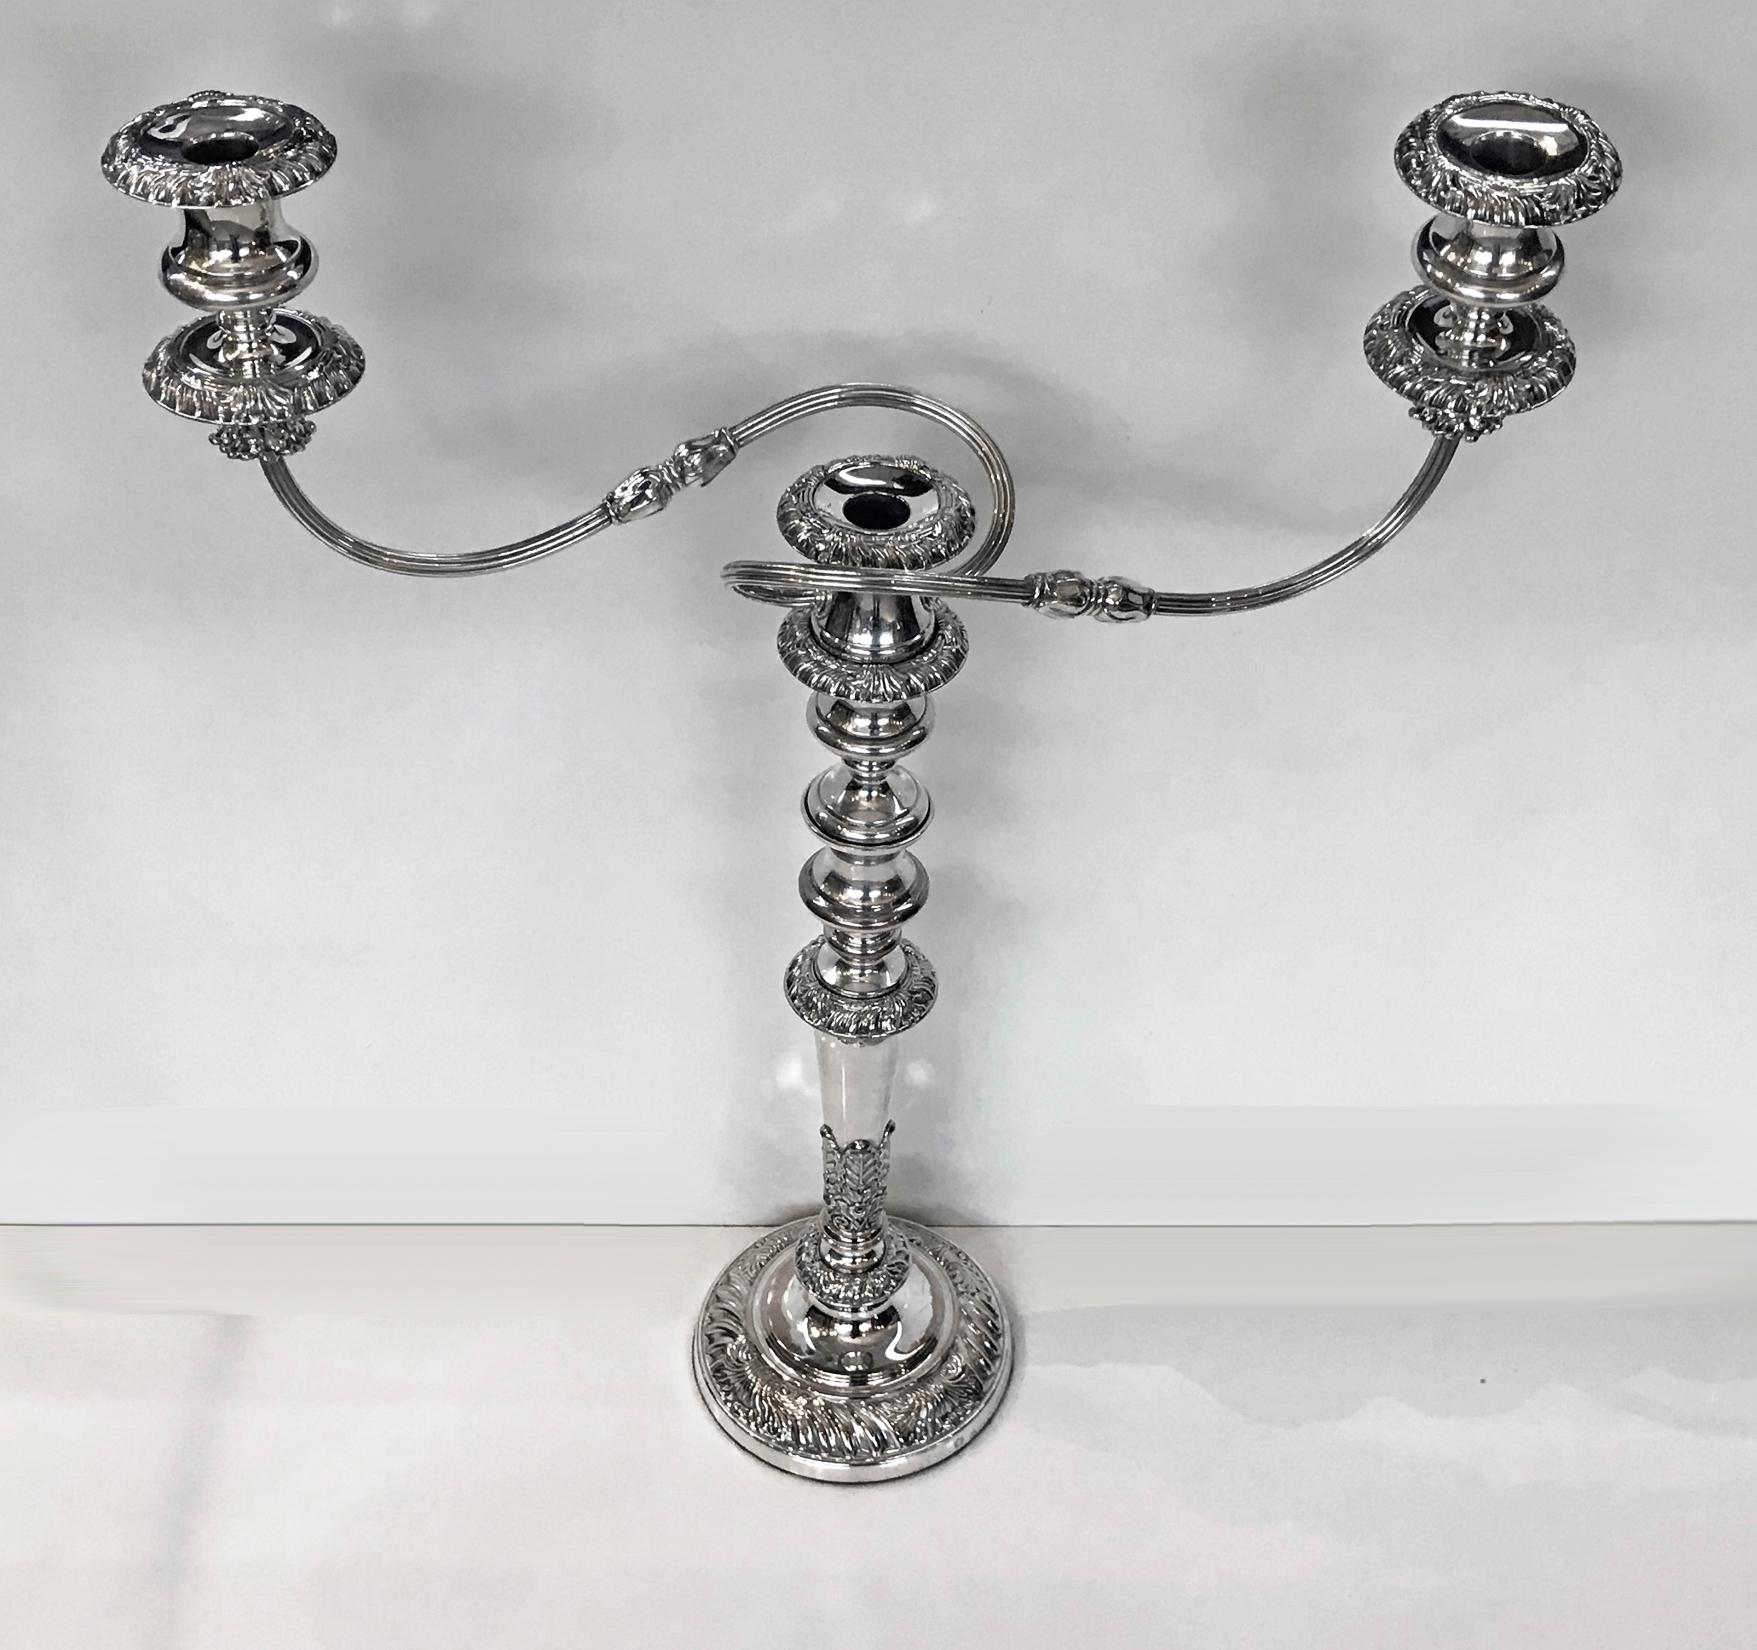 Large pair of antique Sheffield plate candelabra candlesticks English circa 1900 Ellis Bros. The candelabra, Regency Matthew Boulton style, on lobate anthemion circular bases, tapered acanthus stems, each supporting a three light branch (convertible